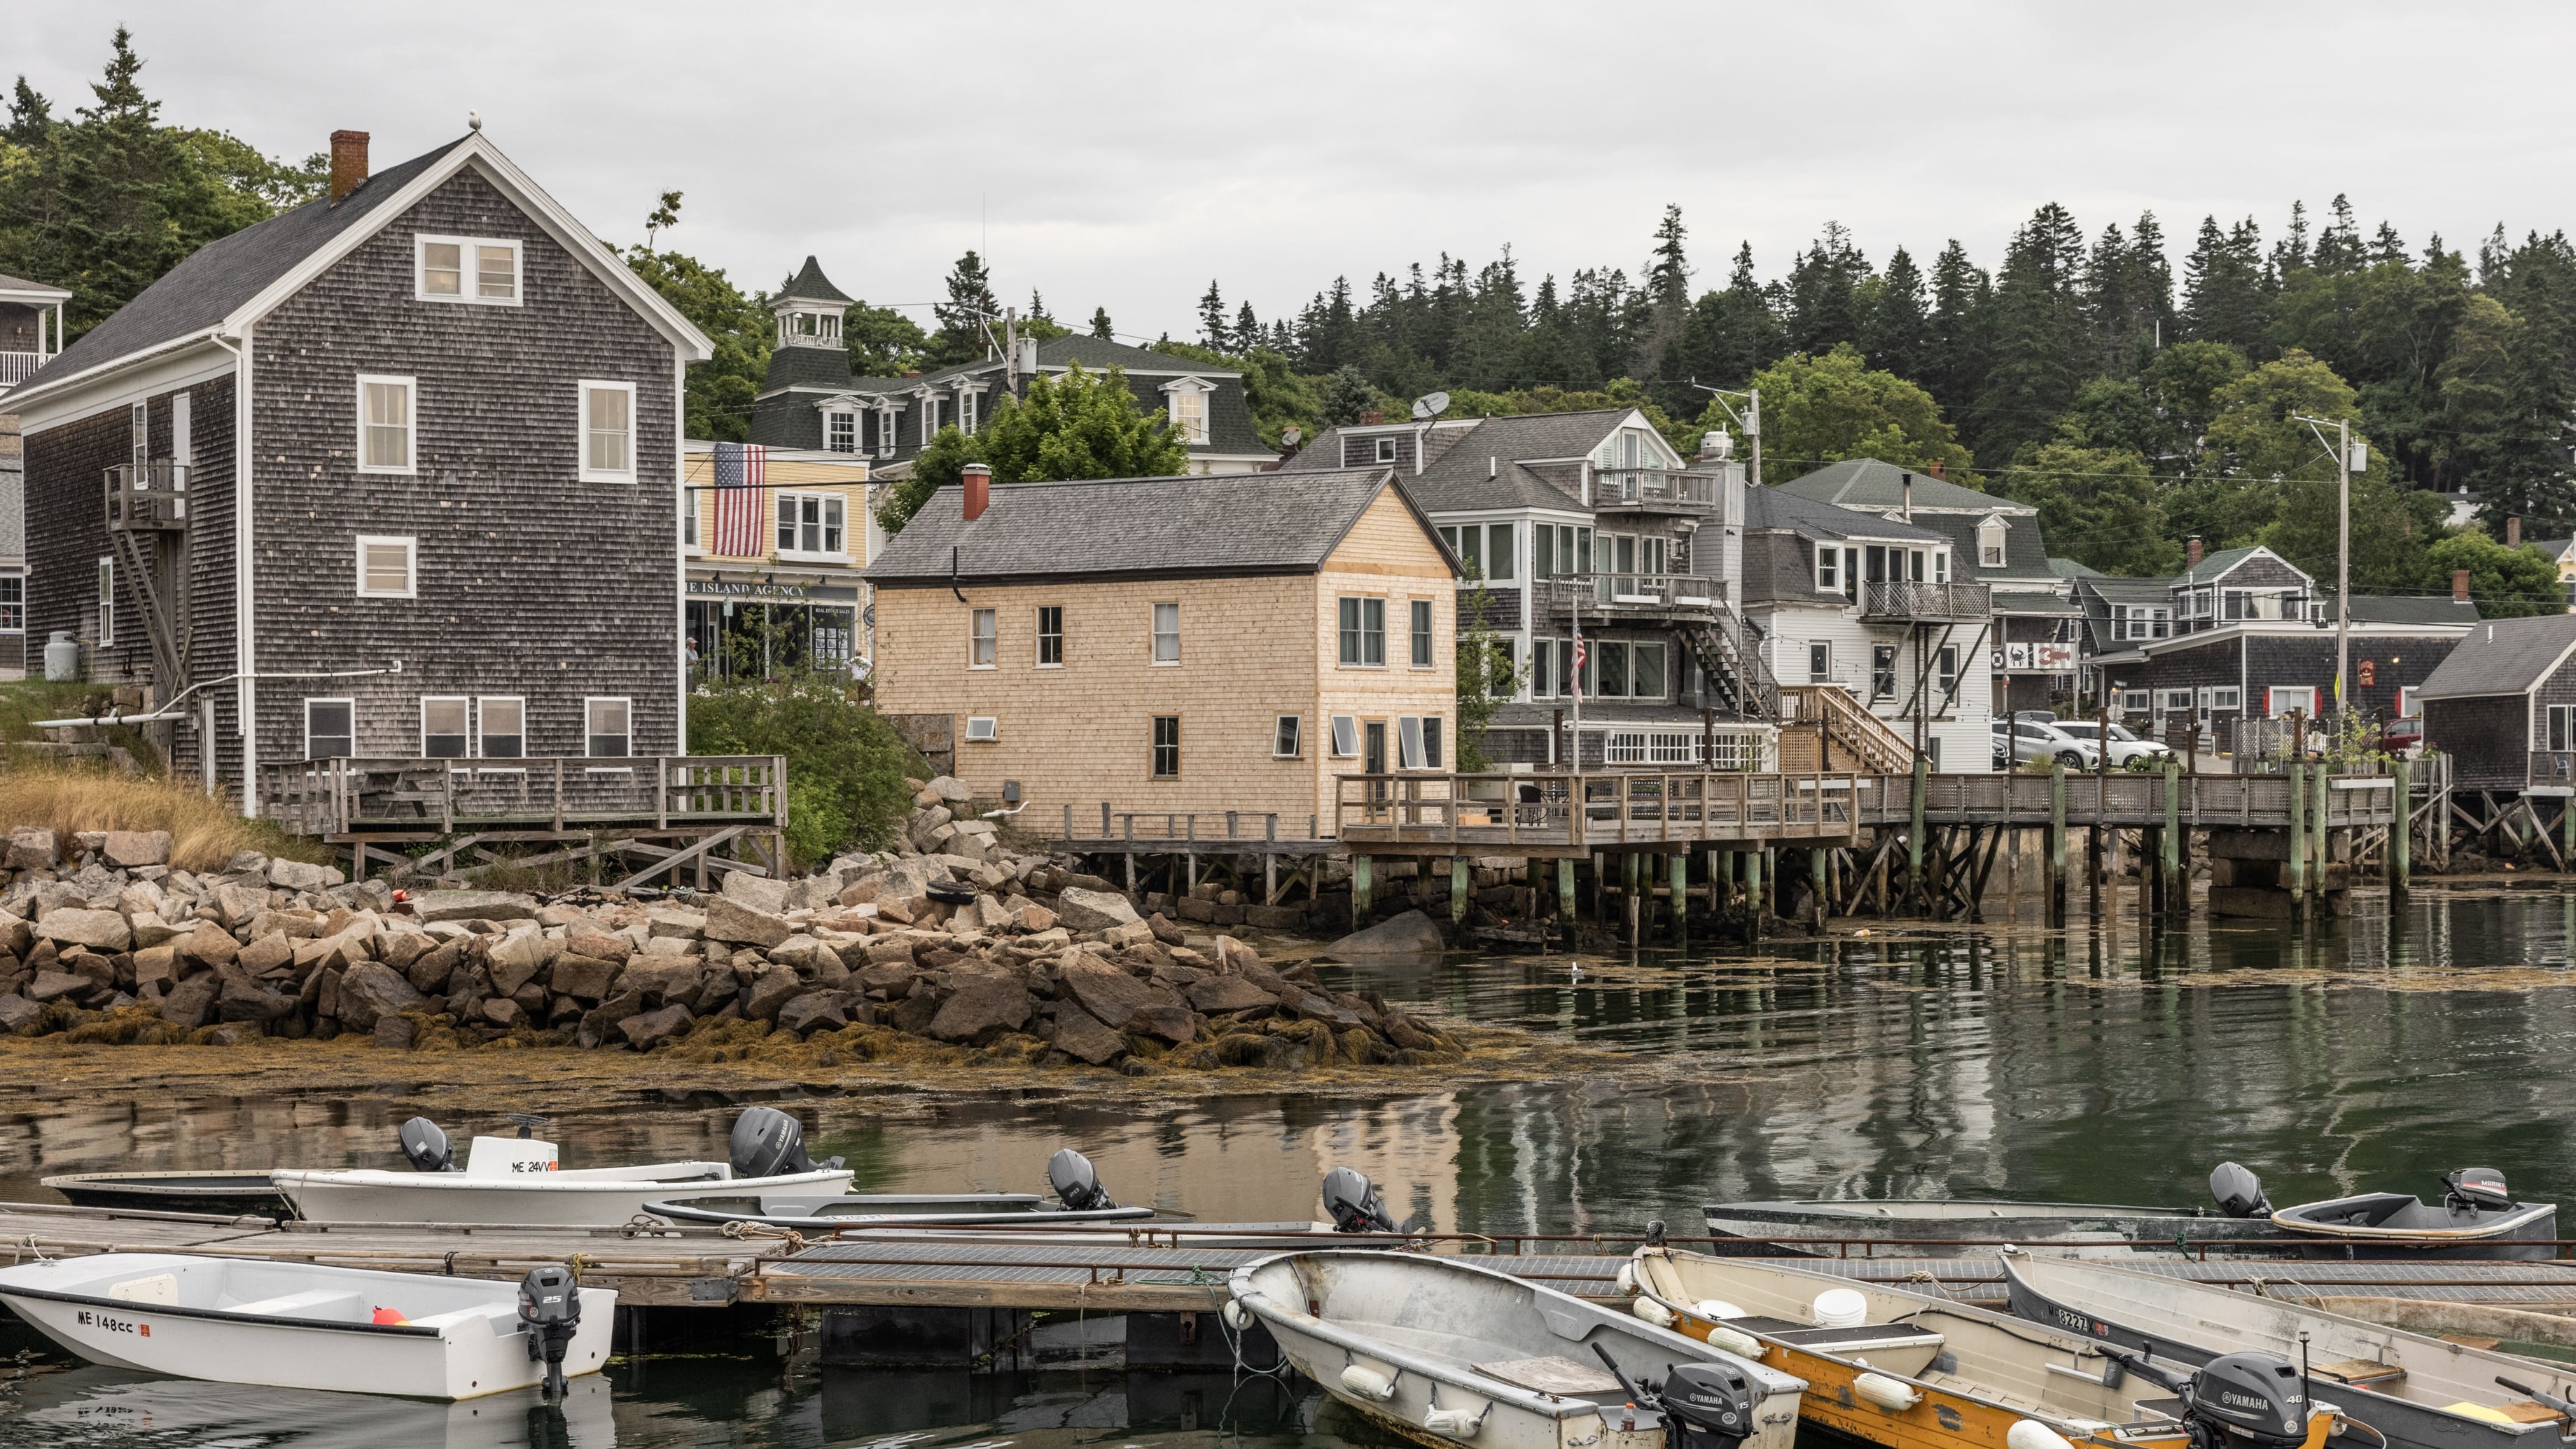 A quaint Maine town with shingled homes sitting on the water next to small boats.